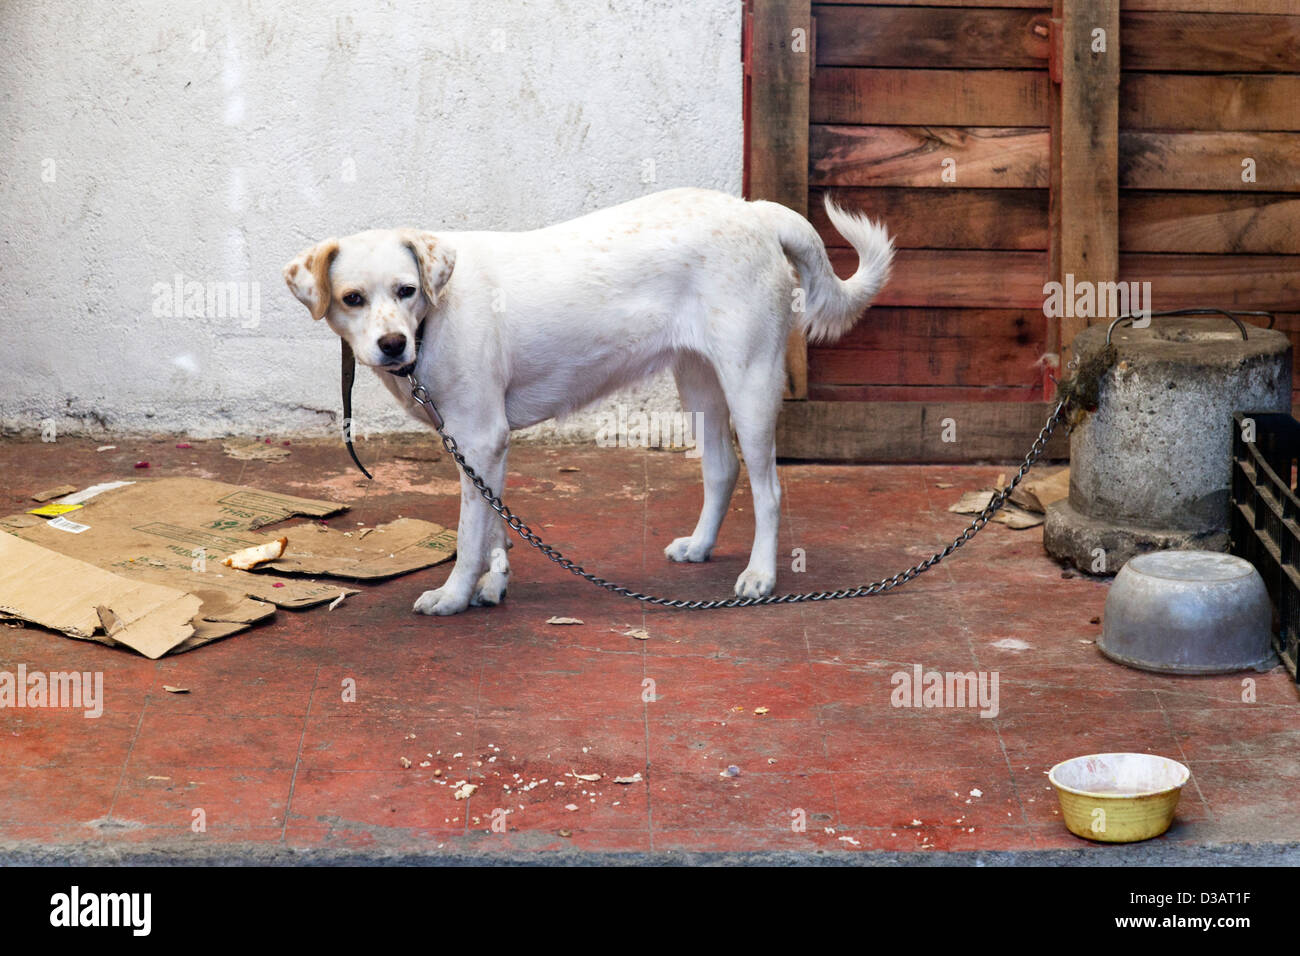 friendly appealing white dog with brown spotted ears at home tethered in a Mexican courtyard in Oaxaca de Juarez Mexico Stock Photo